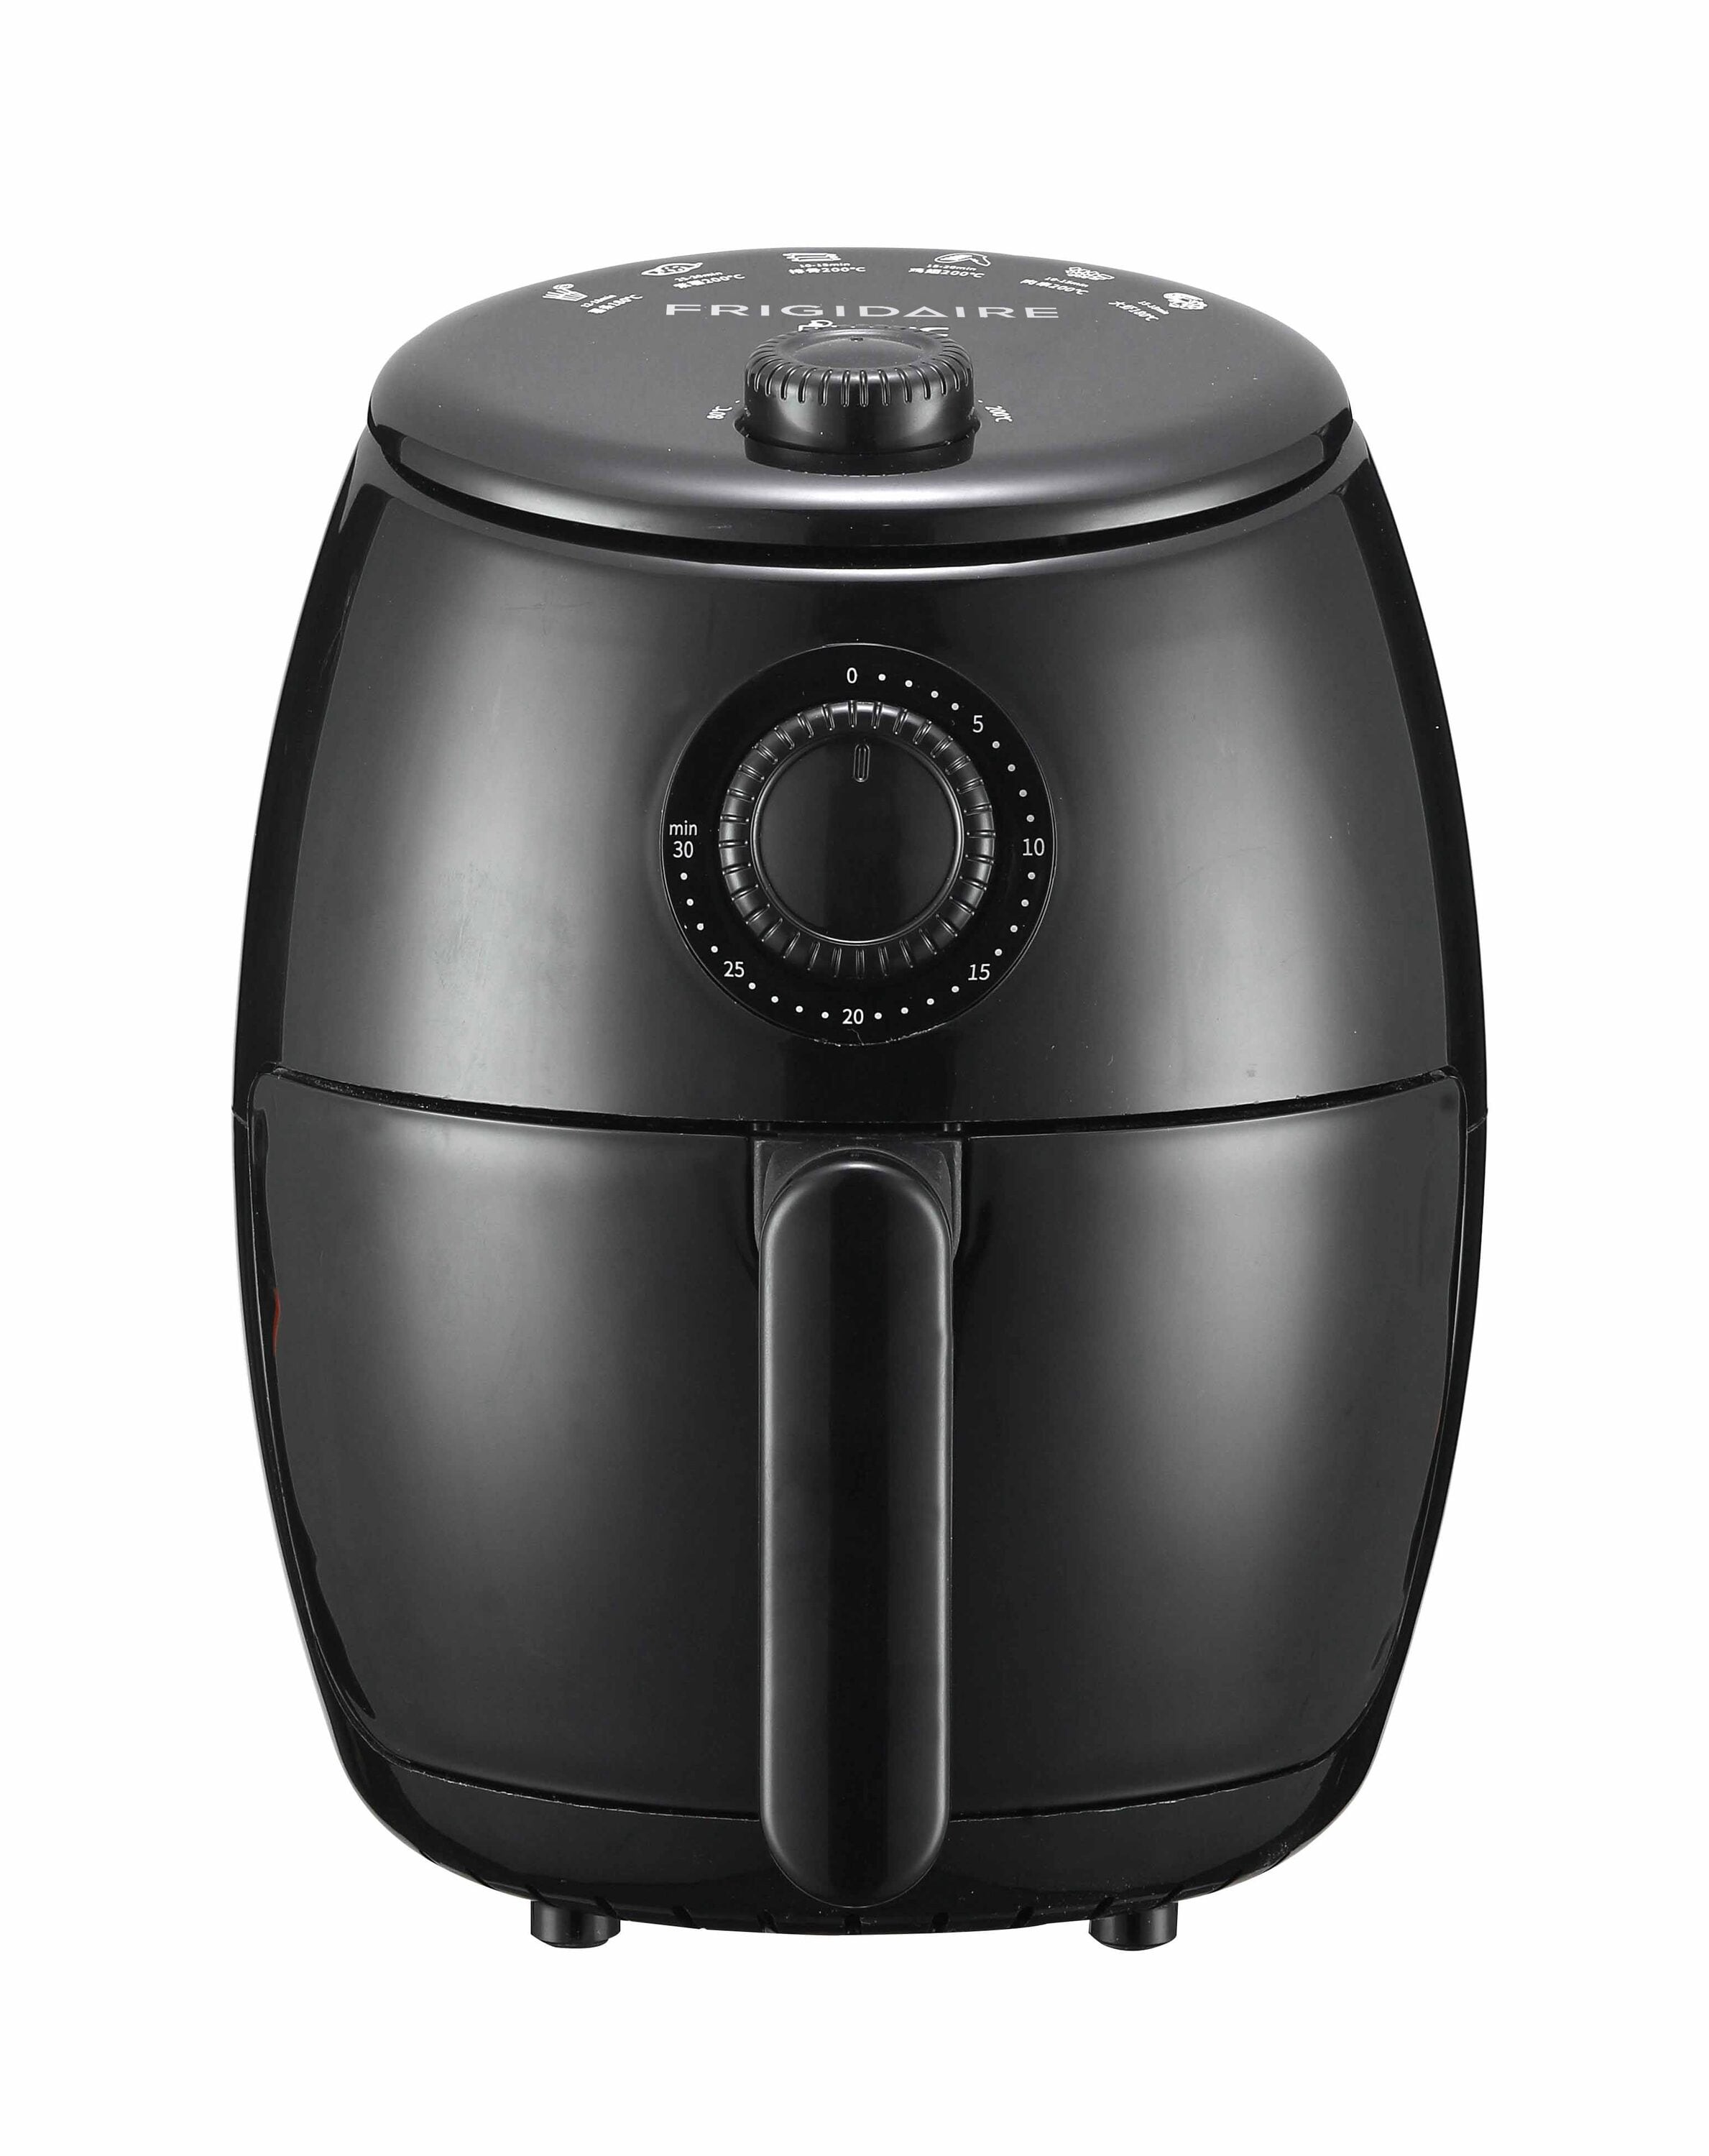 Elite Gourmet 1Qt Compact Air Fryer in Slate Blue - Oil-less, Programmable,  UL Safety Listed, 1-Quart Capacity, Non-Stick, Ready Light Indicator in the  Air Fryers department at